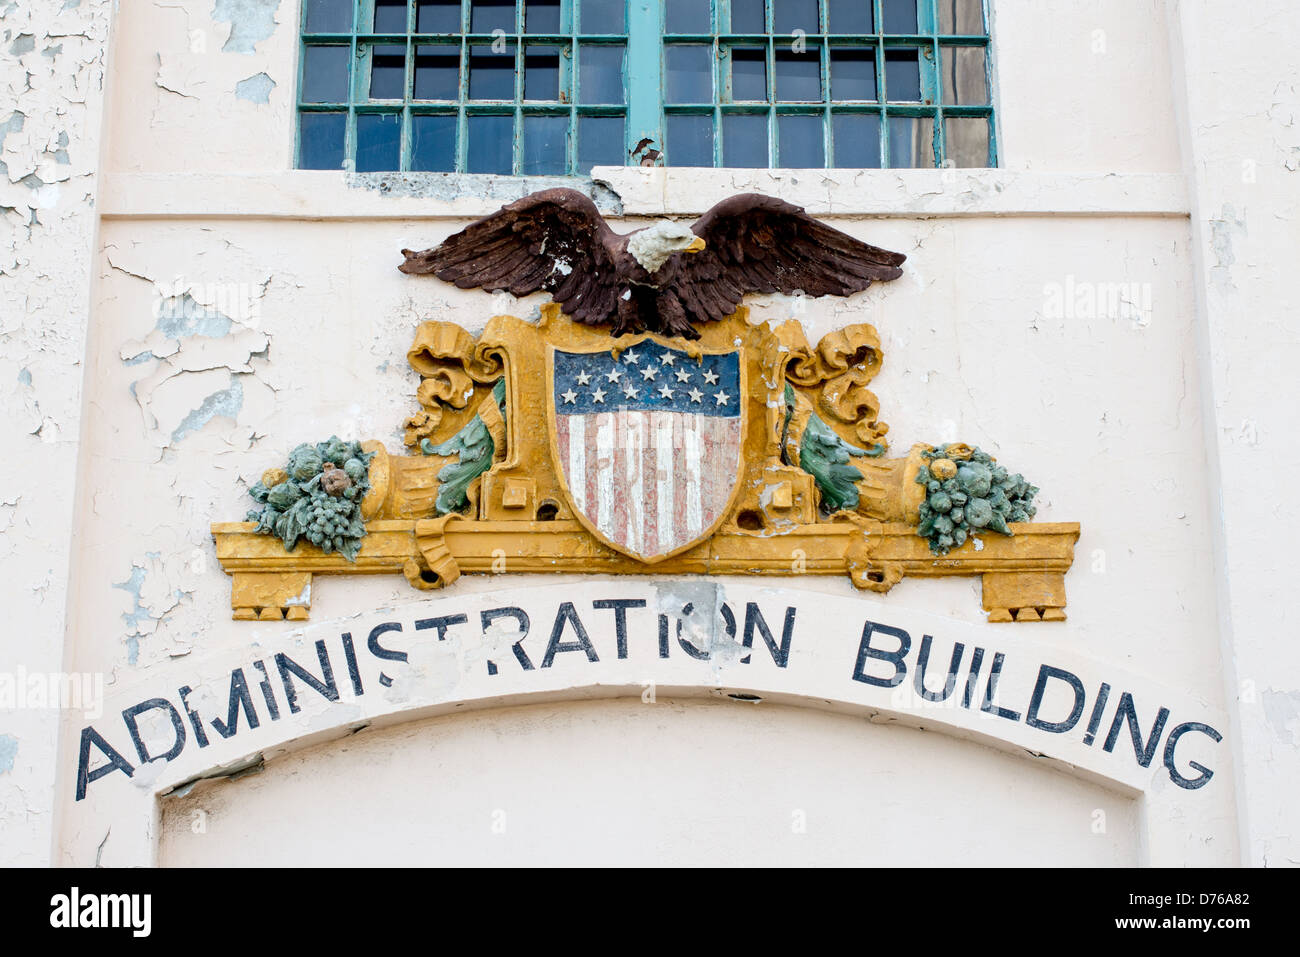 SAN FRANCISCO, California - A sign with a government seal on the Administration Building of Alcatraz. Known for its notorious inmates and rumored inescapability, Alcatraz now serves as a significant tourist attraction and National Park Service site, providing insight into the prison system and historic events of the 20th century. Stock Photo